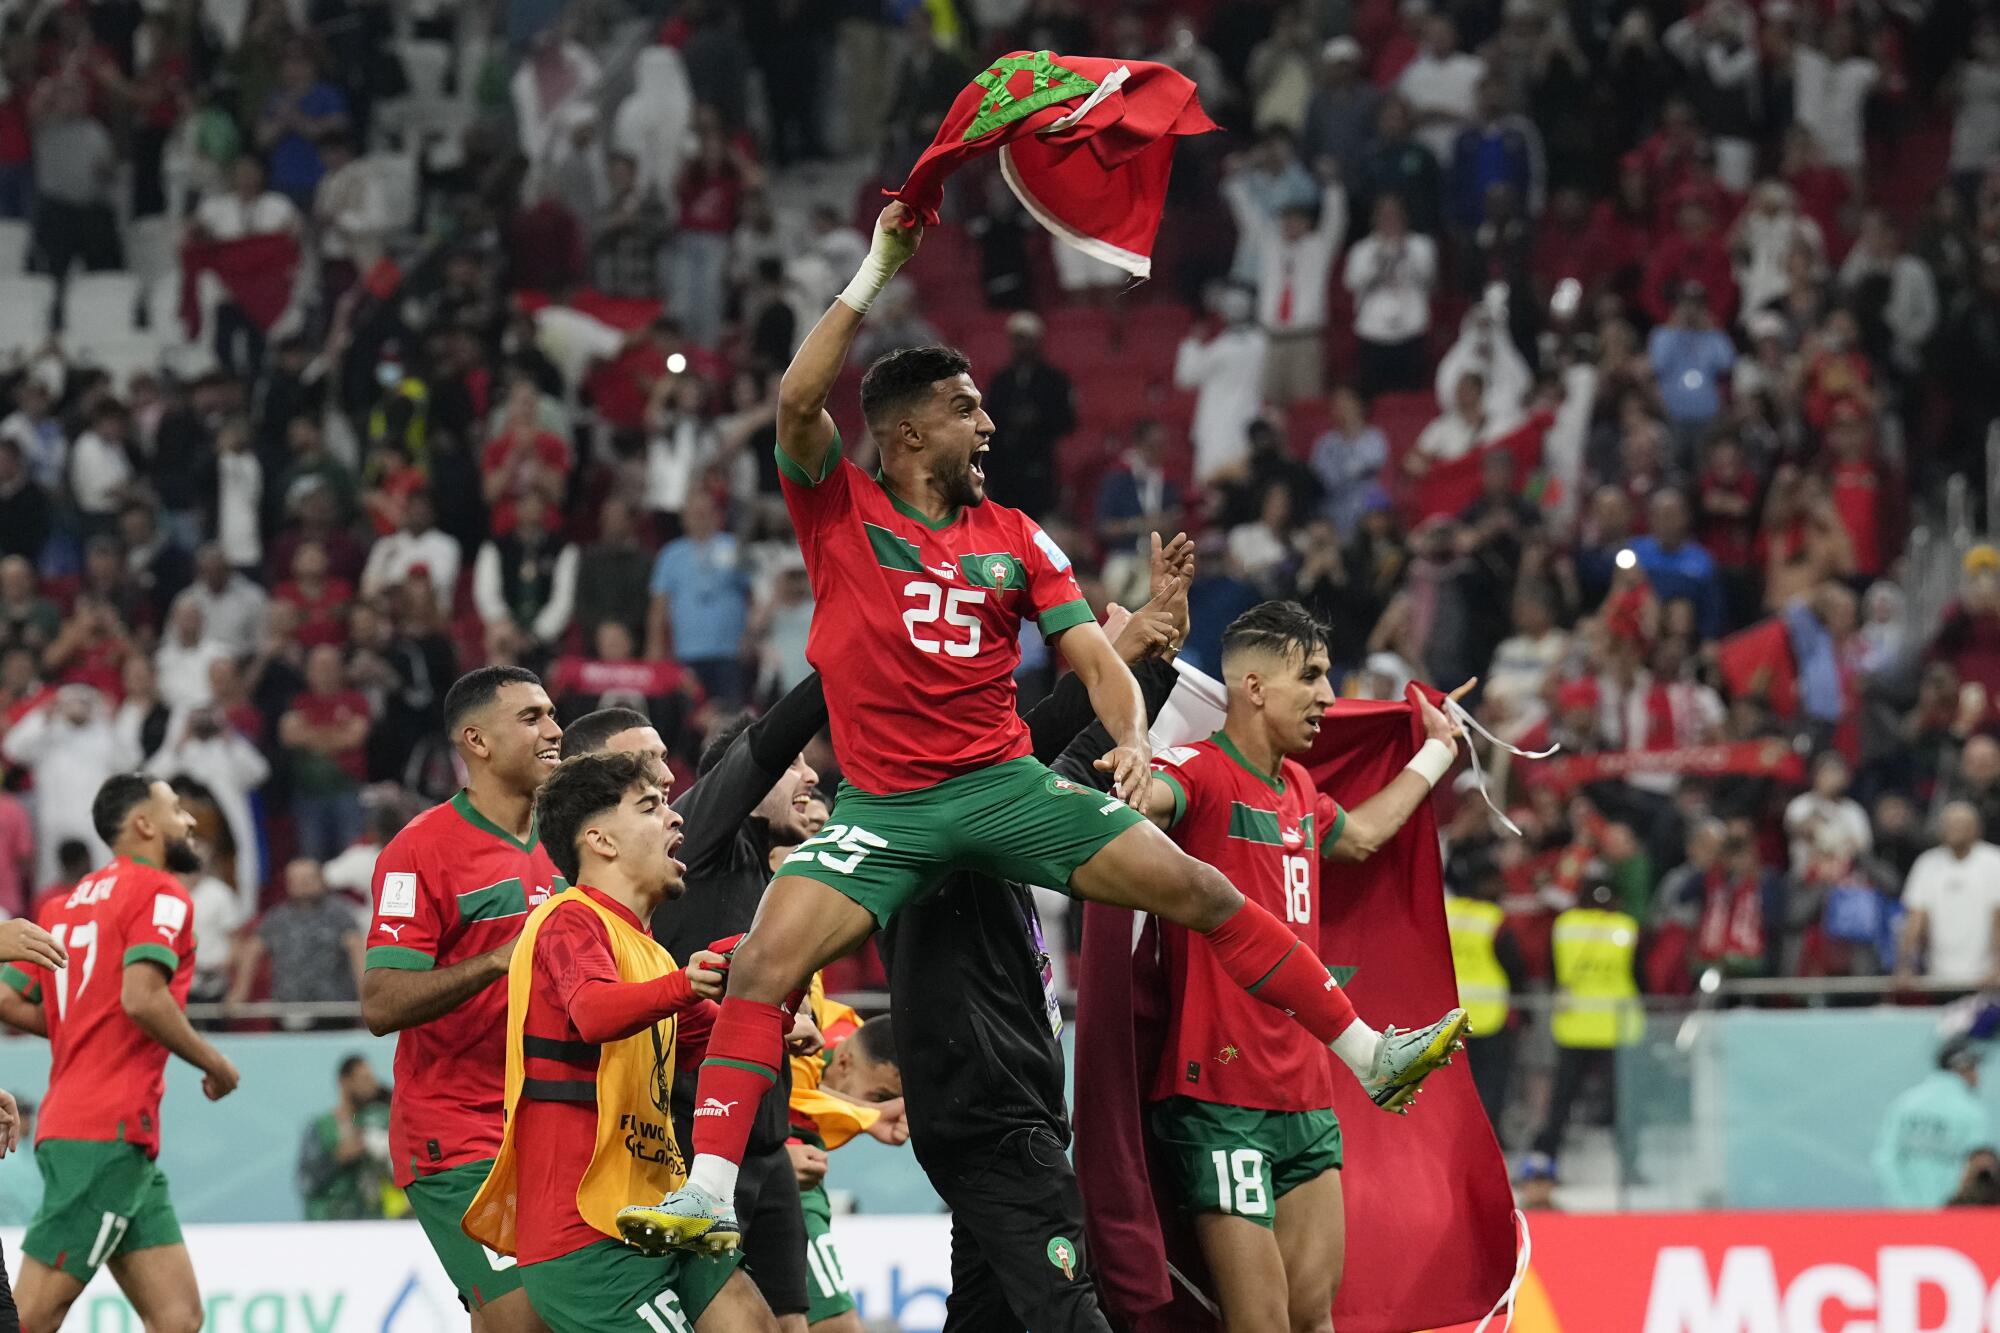 Morocco's Yahia Attiyat Allah jumps and waves his country's flag as he celebrates with teammates.